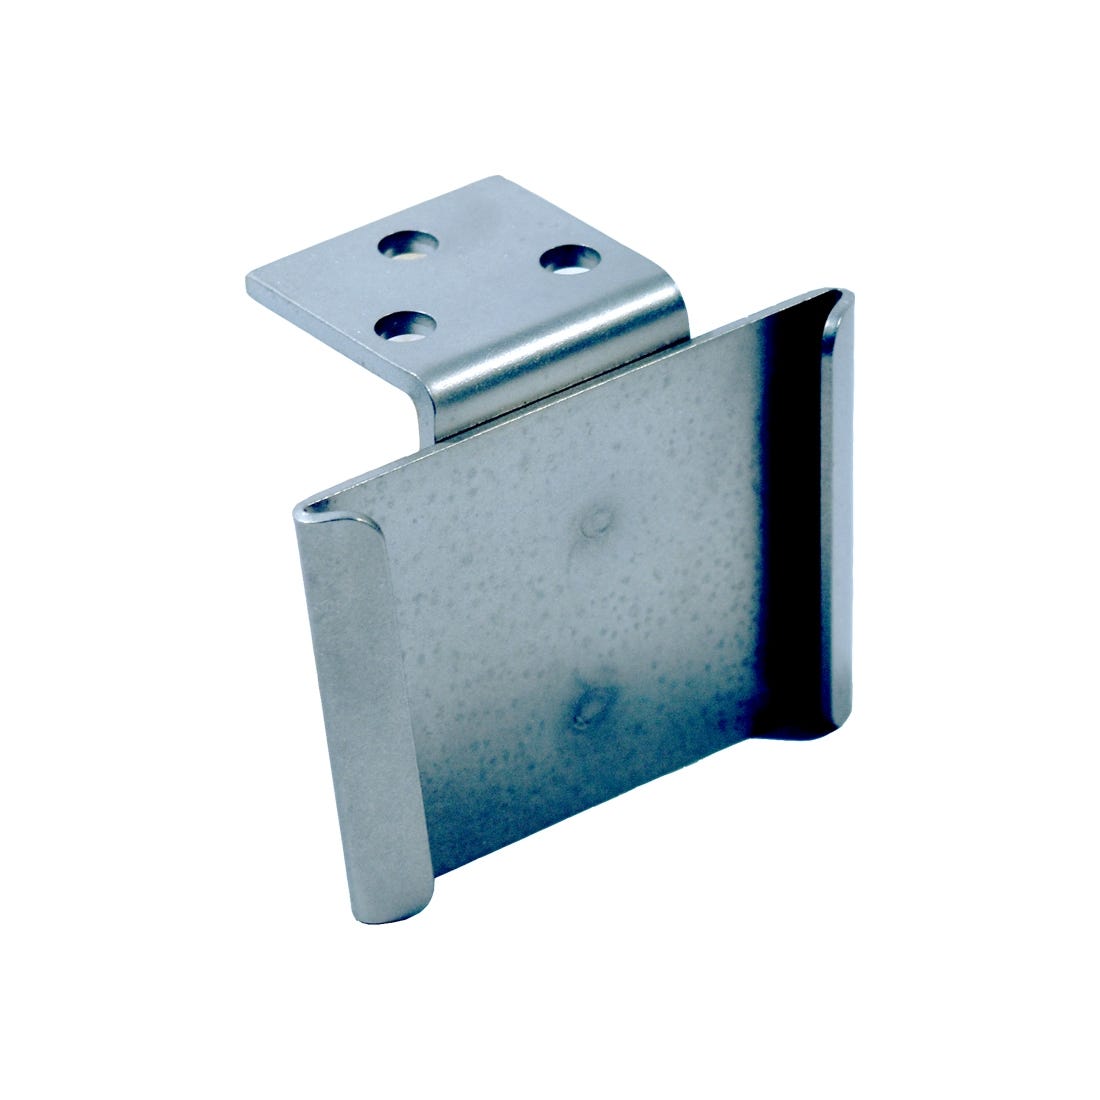 ACE Female Armboard Bracket 1" Offset, stainless steel